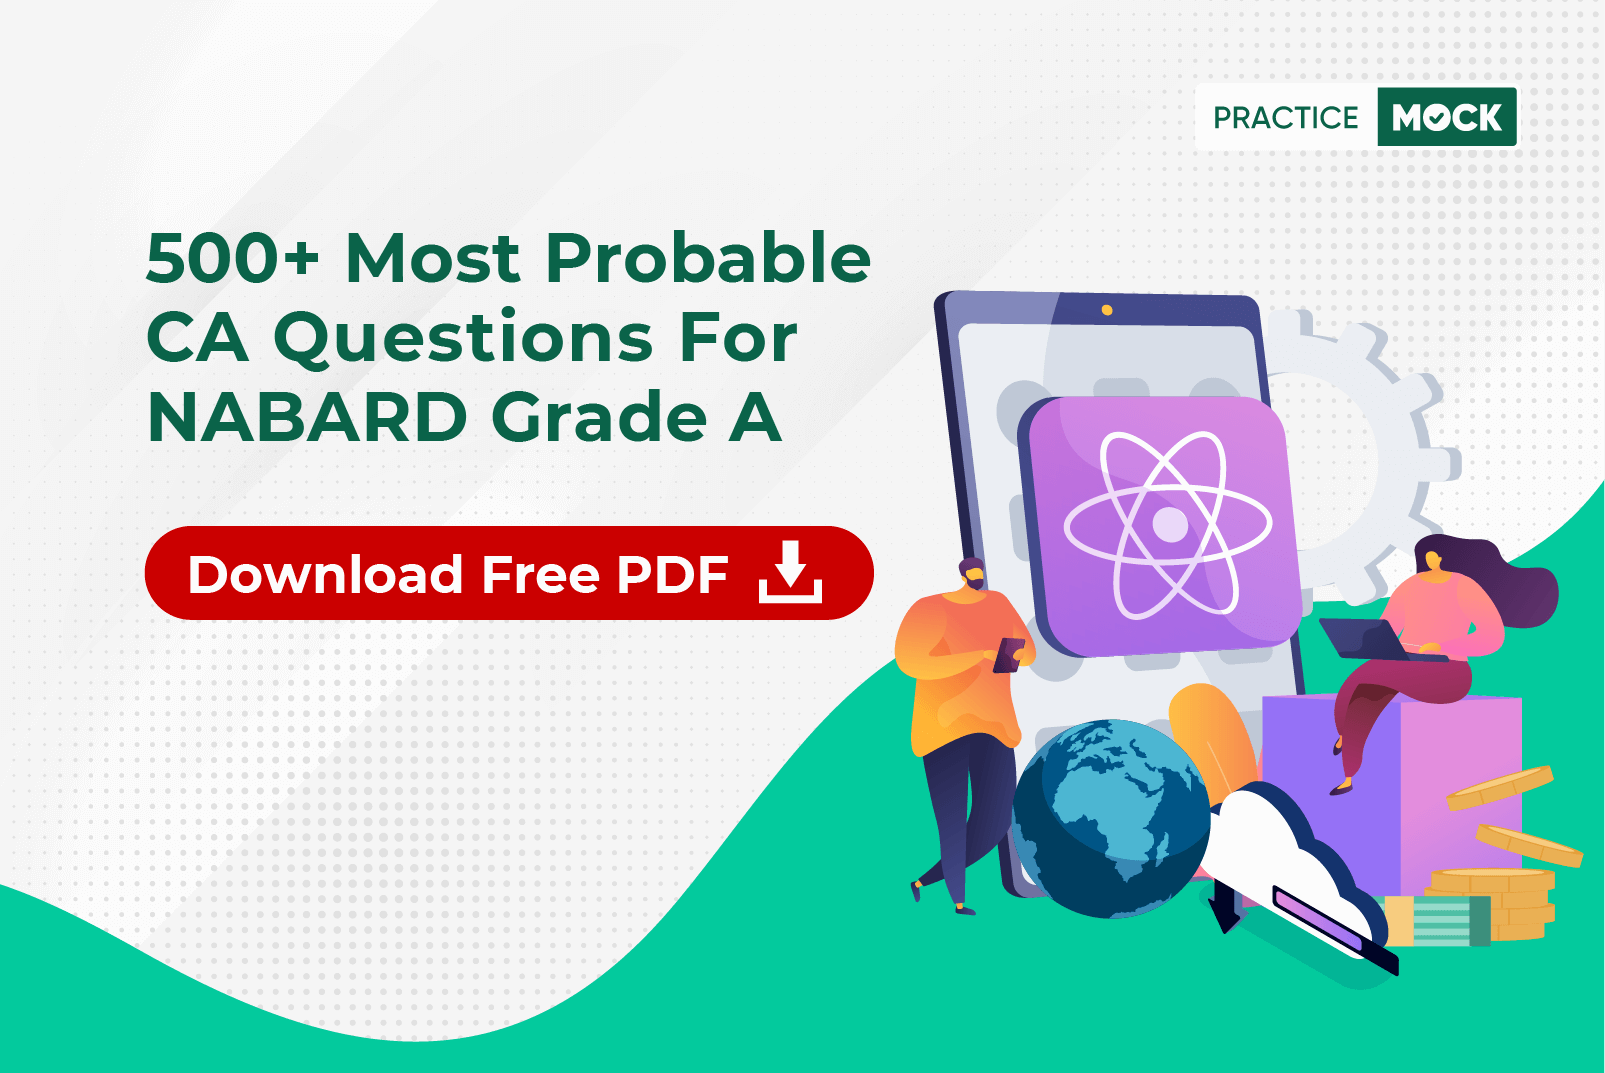 500+ Most Probable CA Questions for NABARD Grade A- Download Free PDF